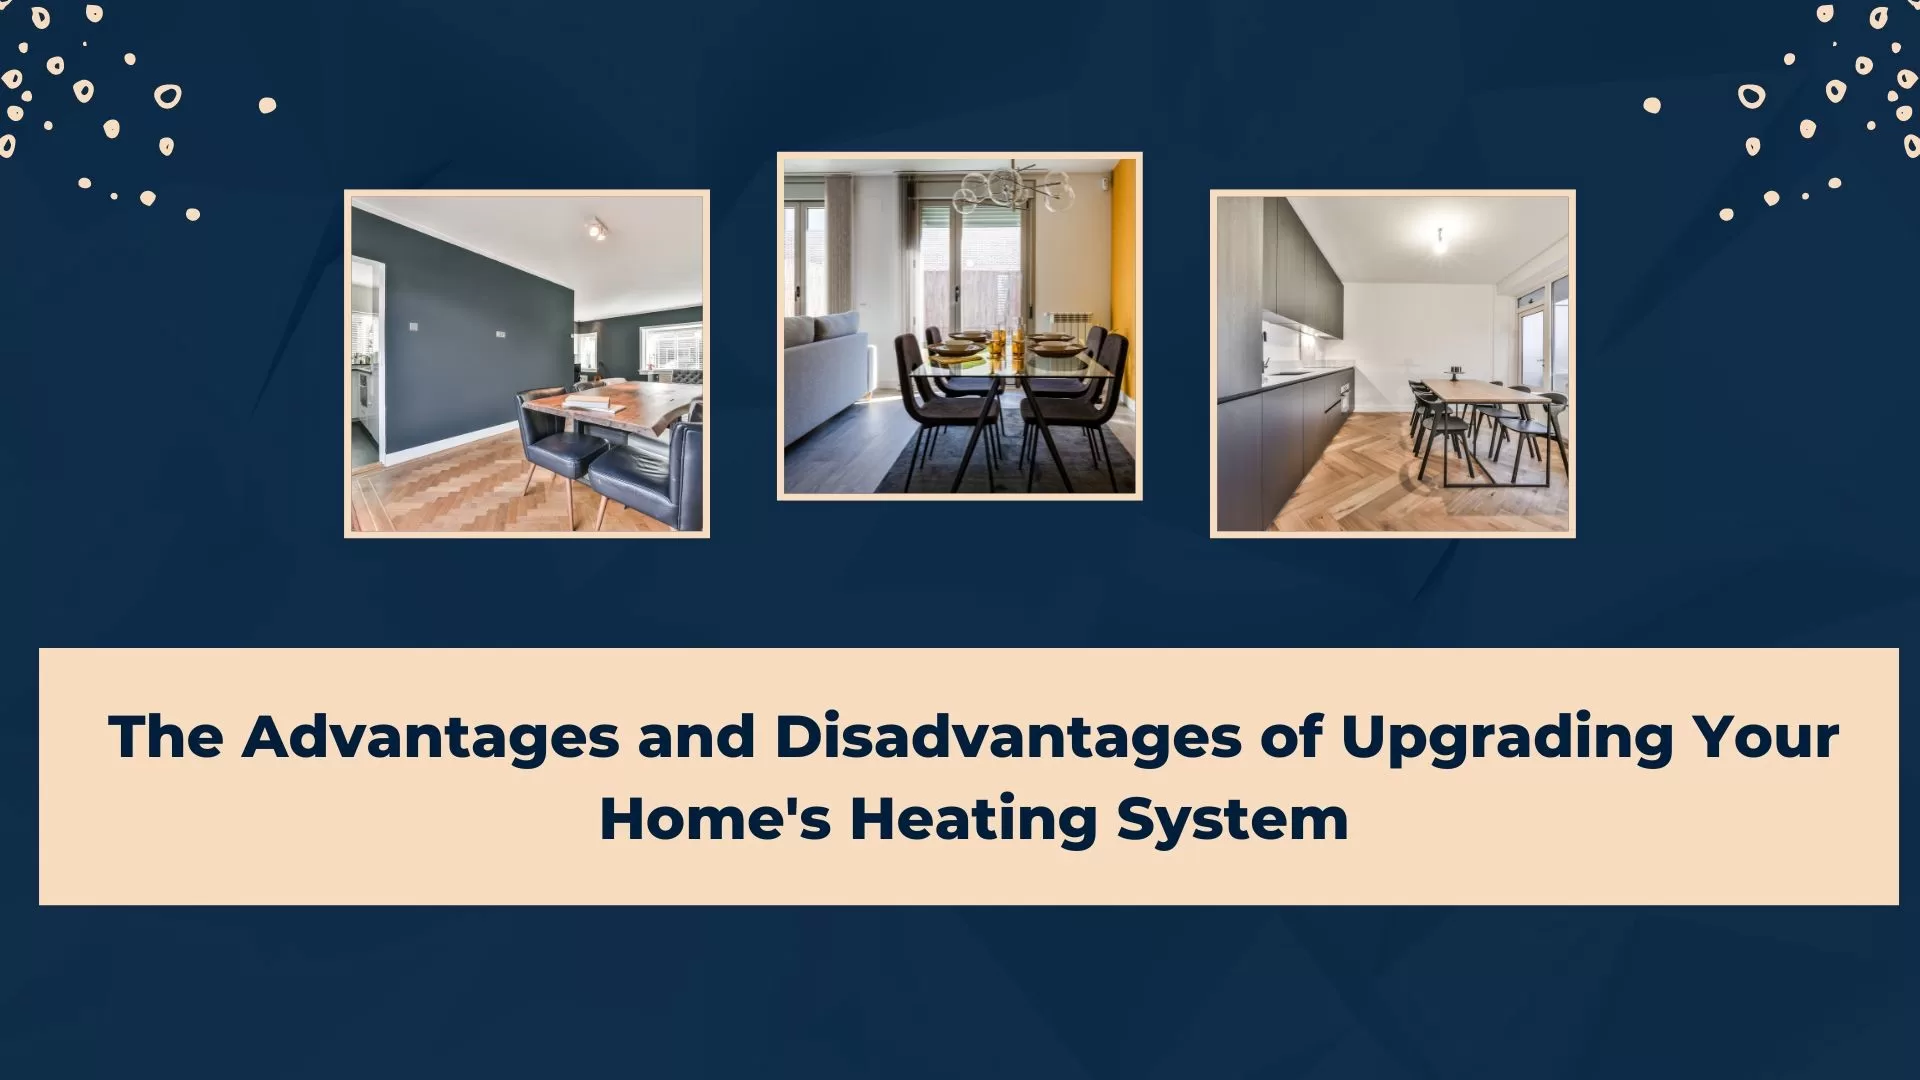 image - The Advantages and Disadvantages of Upgrading Your Home's Heating System